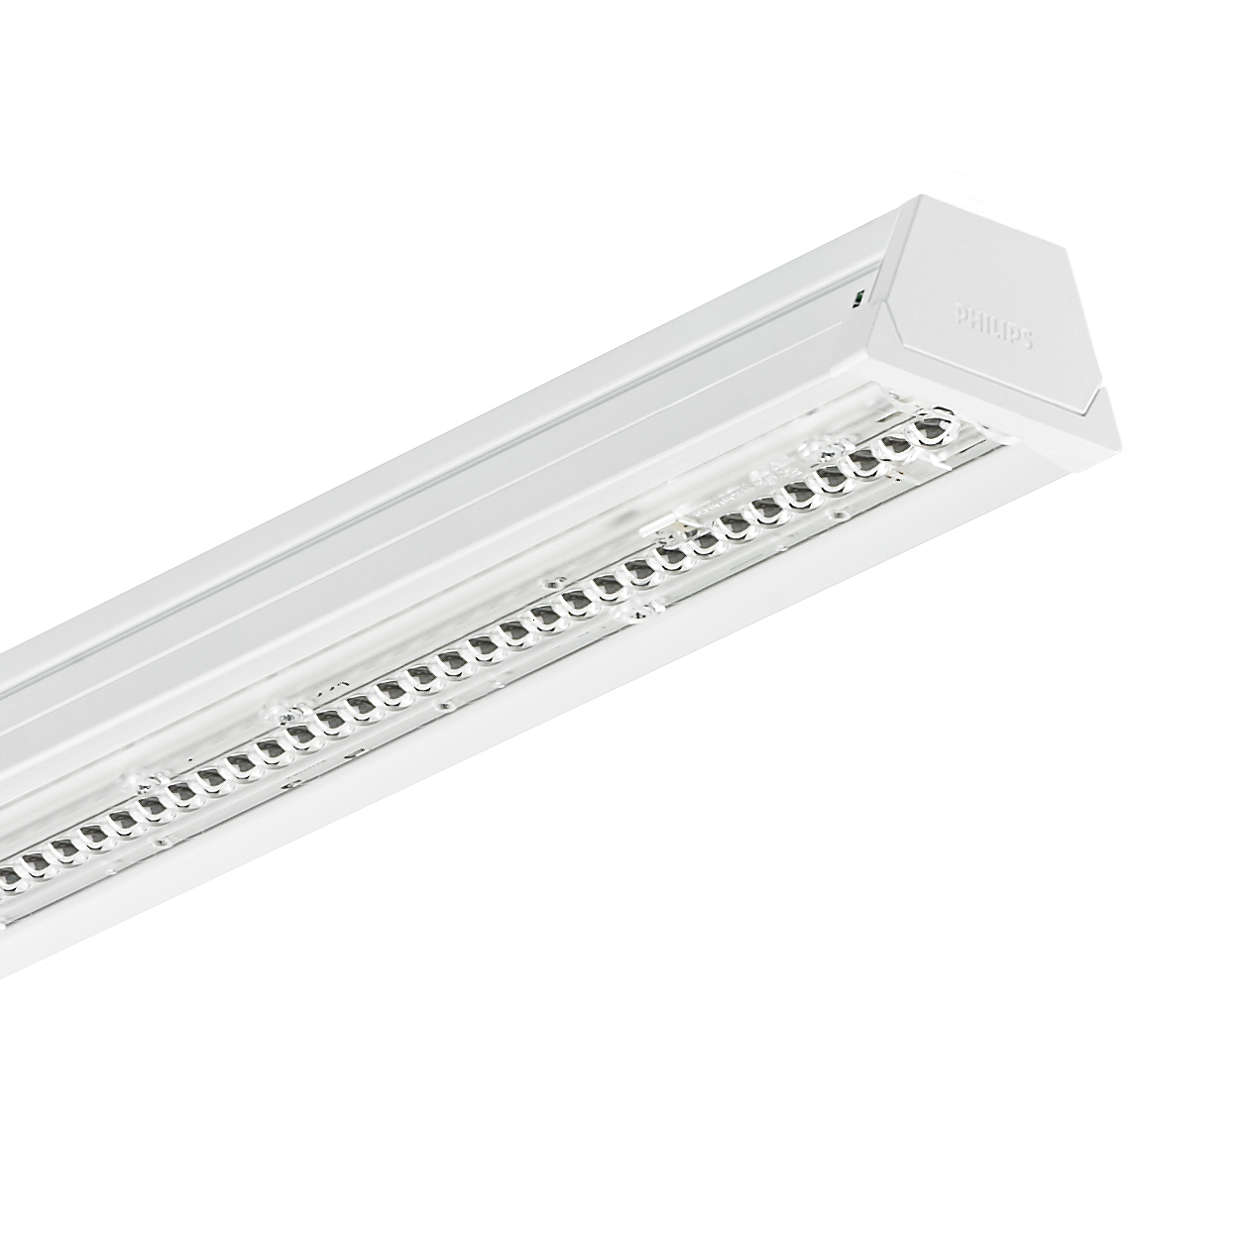 LL120X LED160S/840 2x PSU MB 5 WH CoreLine Trunking - Philips Lighting